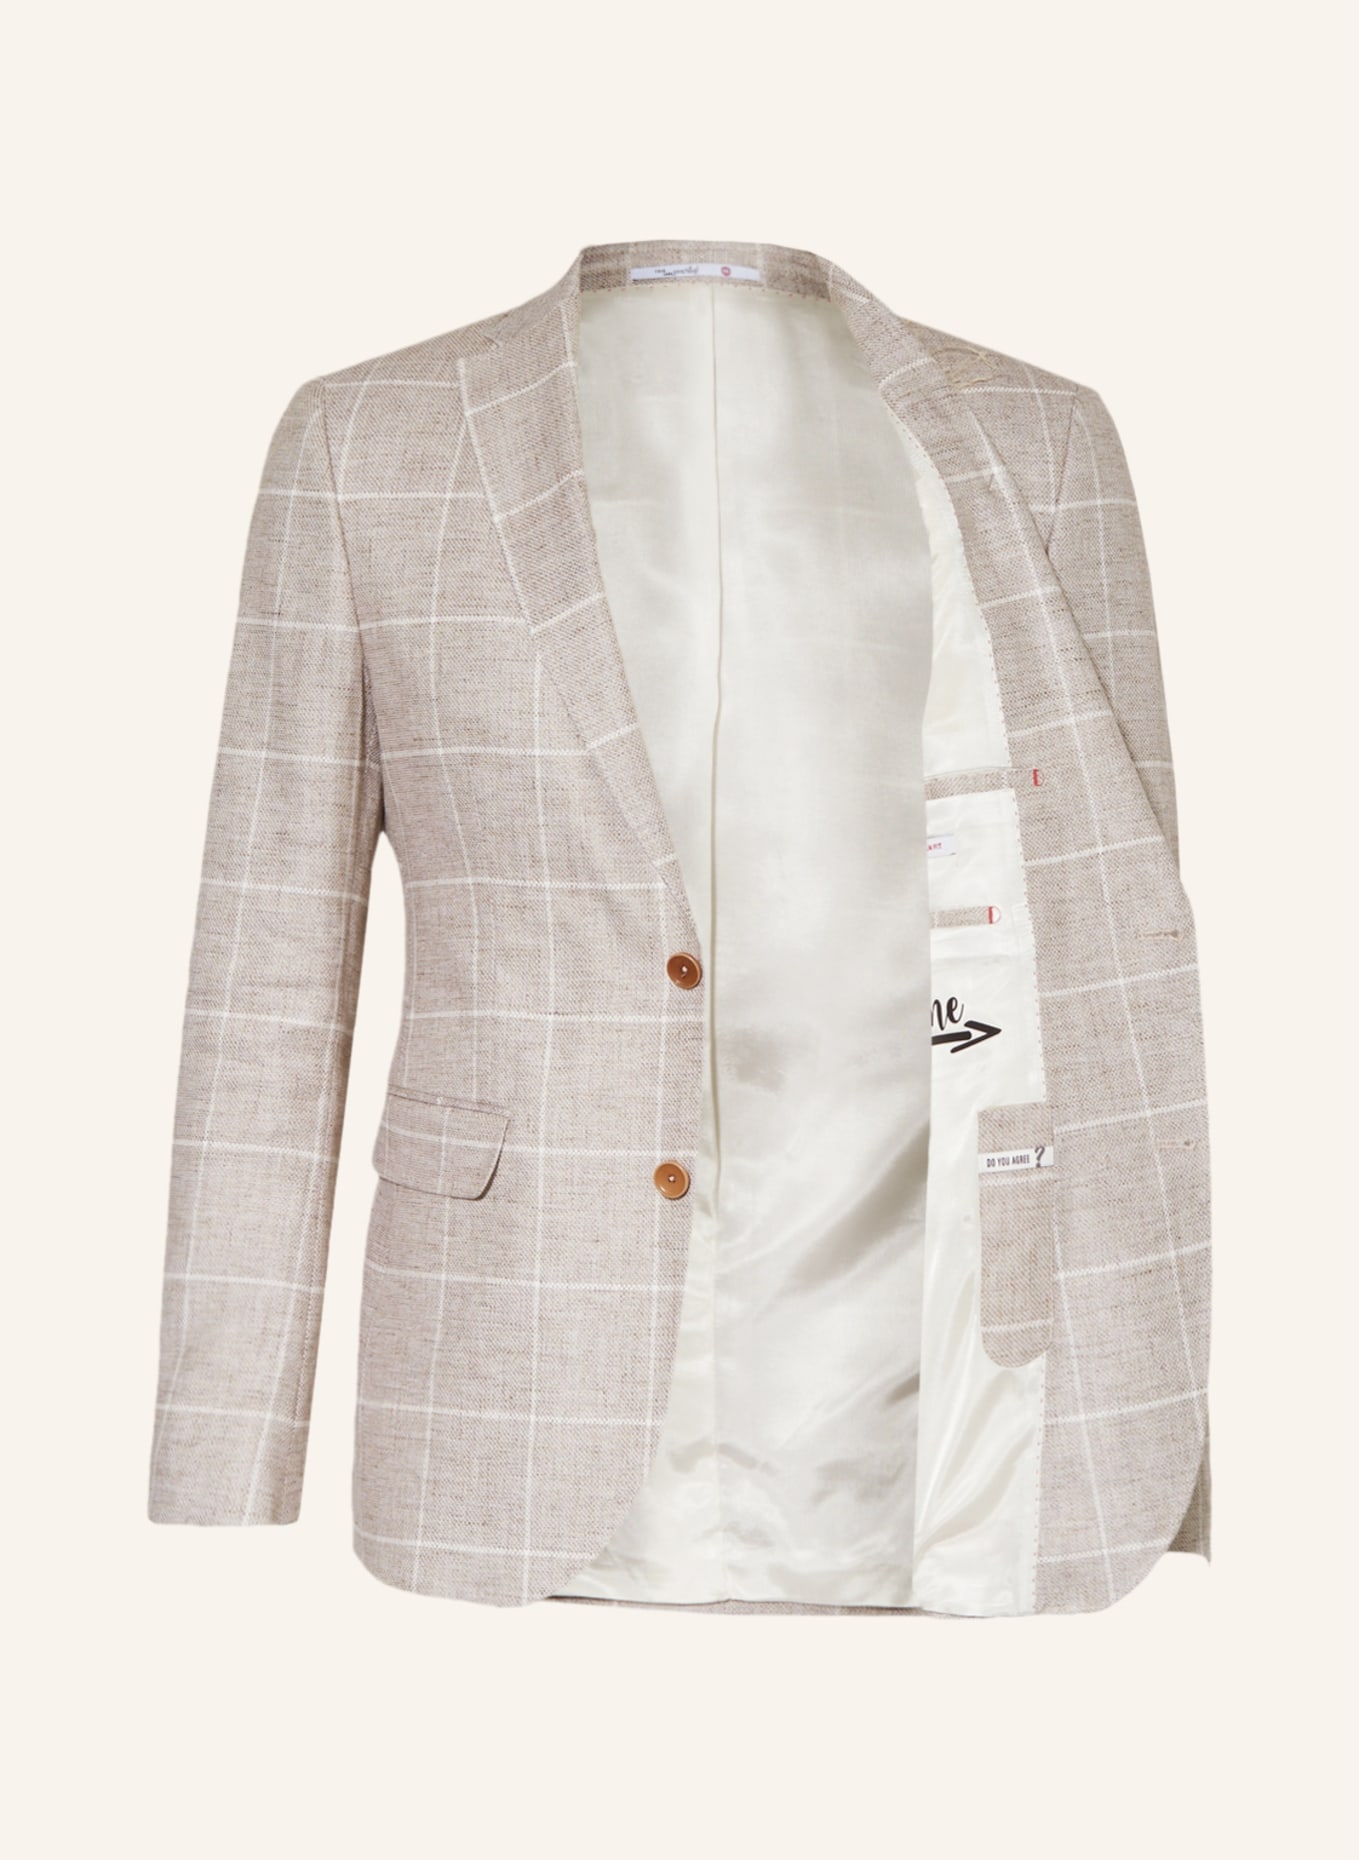 CG - CLUB of GENTS Suit jacket CG PAUL slim fit with linen, Color: 21 beige hell (Image 4)